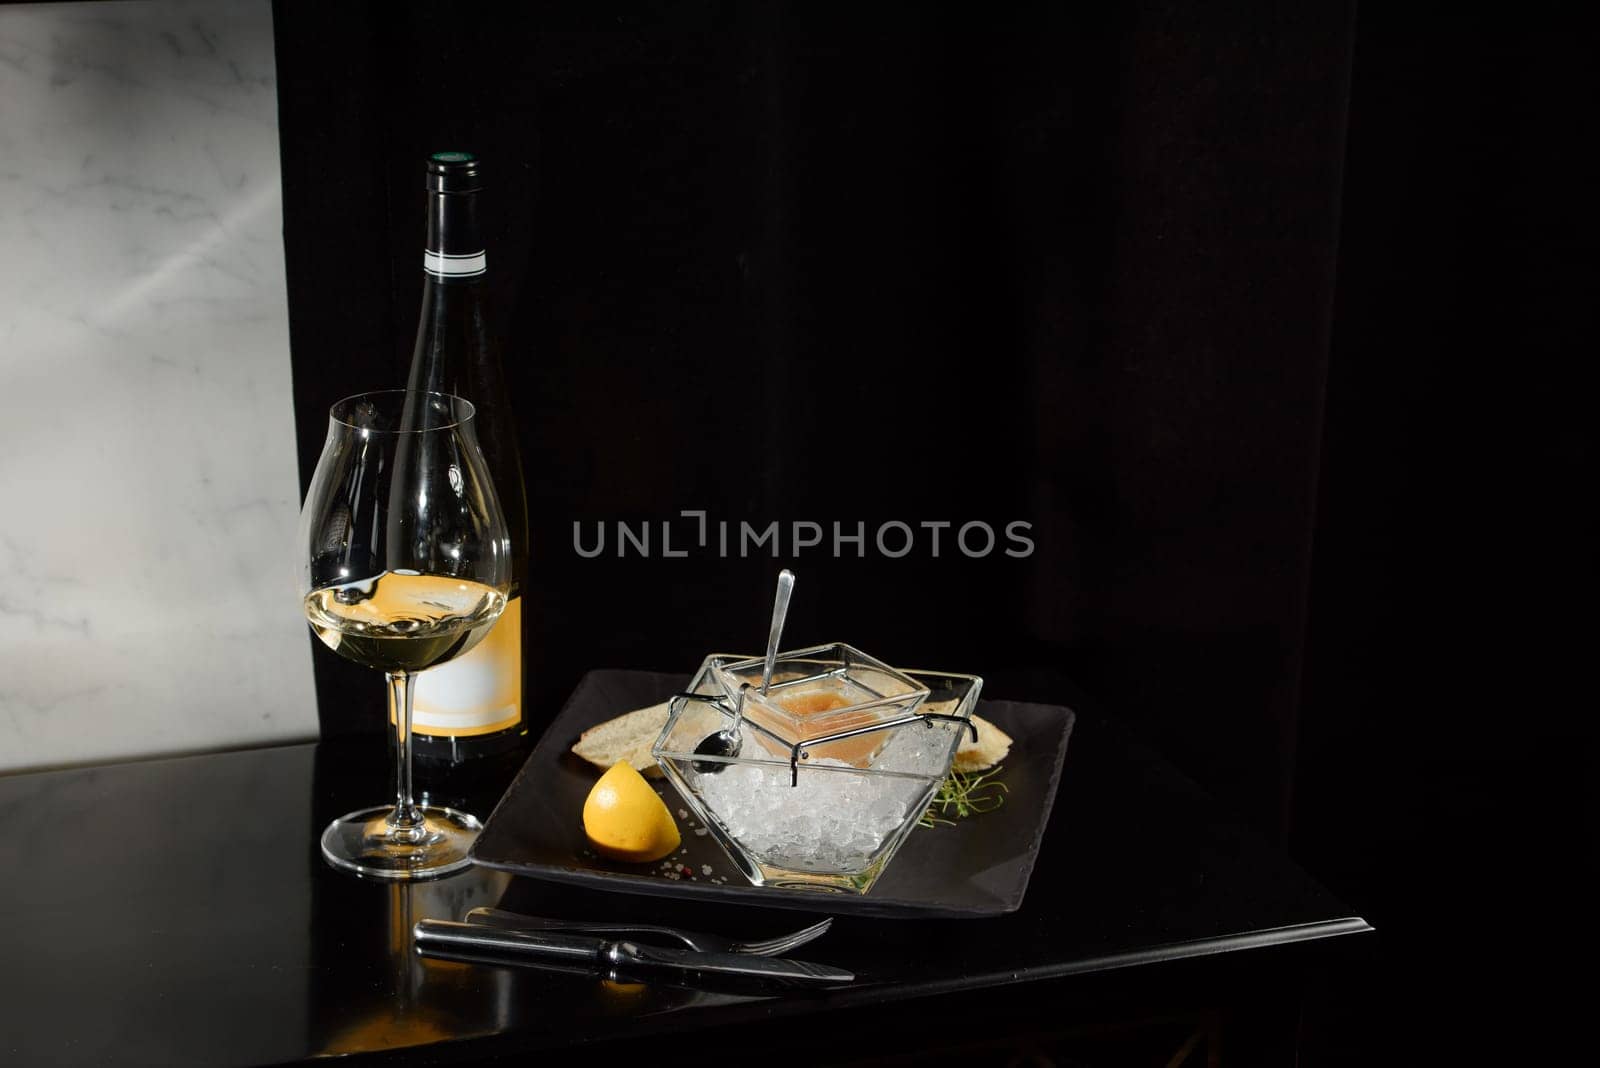 Pike fish caviar, on ice, with croutons, lemon, on a transparent dish, on a dark background by Ashtray25